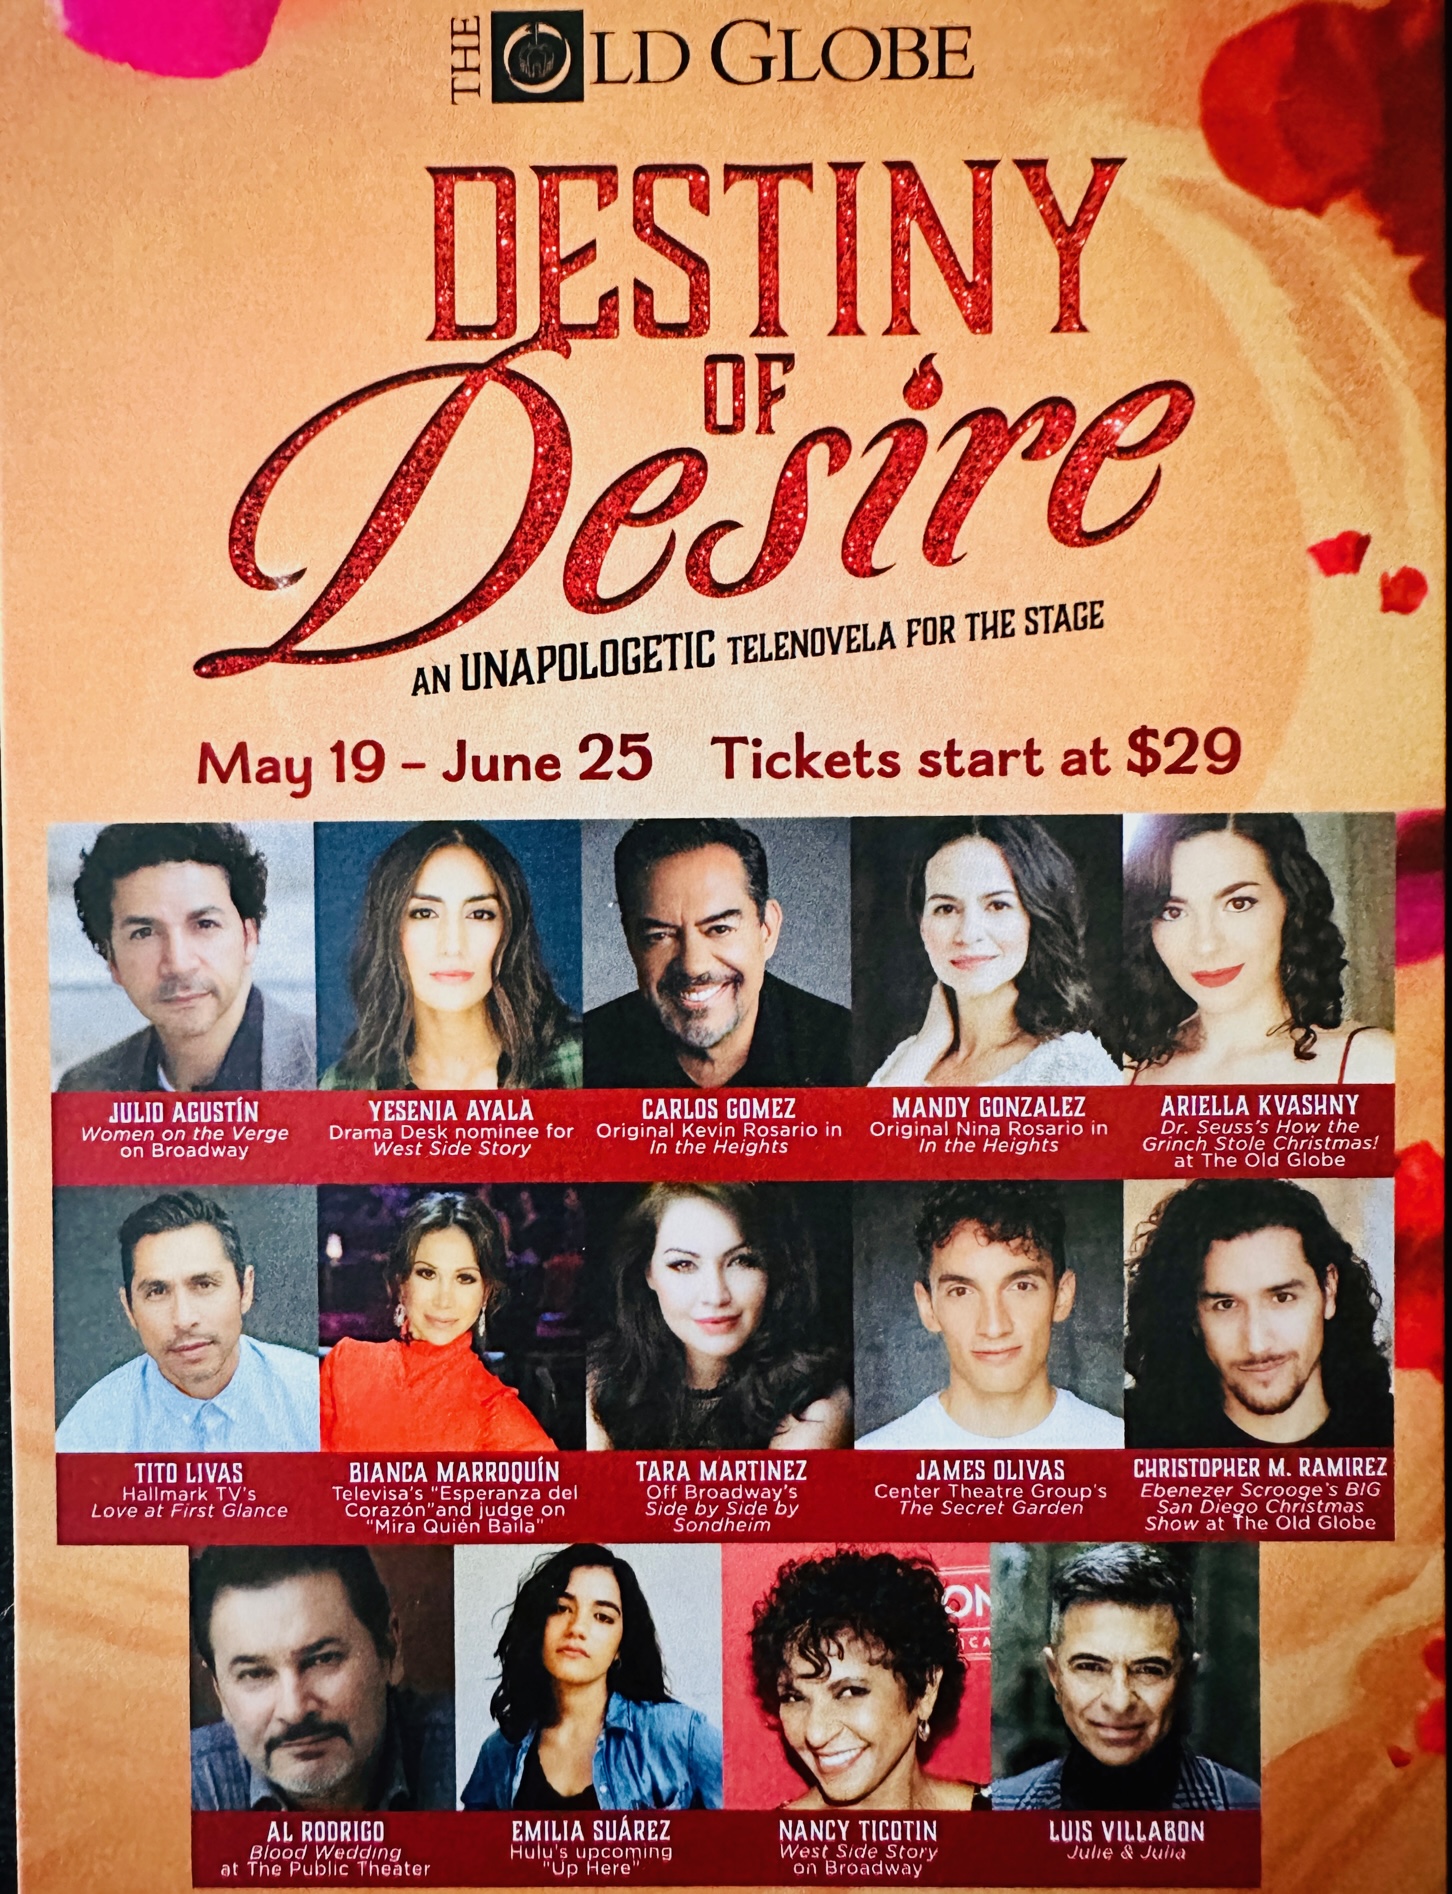 The playbill for the Old Globe production of Destiny of Desire with photos of the cast